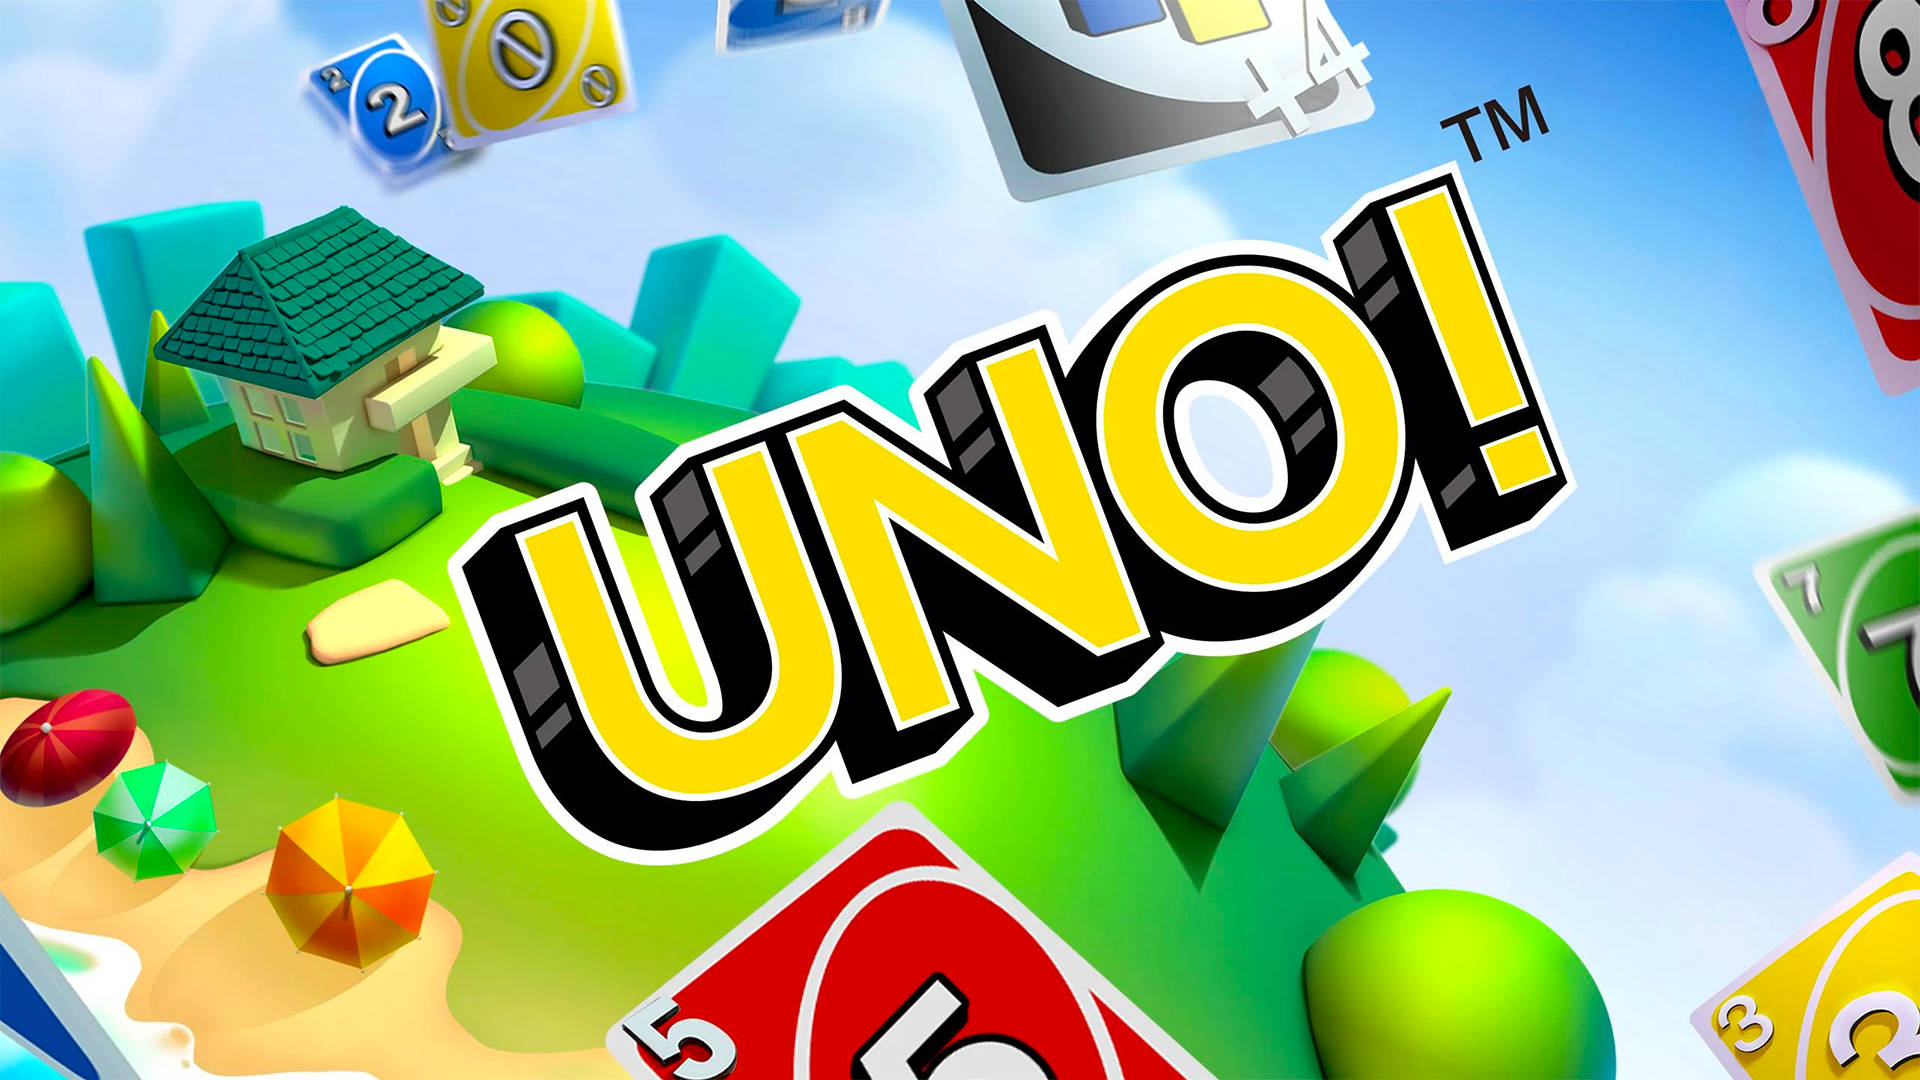 An Exciting Play In Uno - Colorful Uno Card Deck Spread Out On A Table